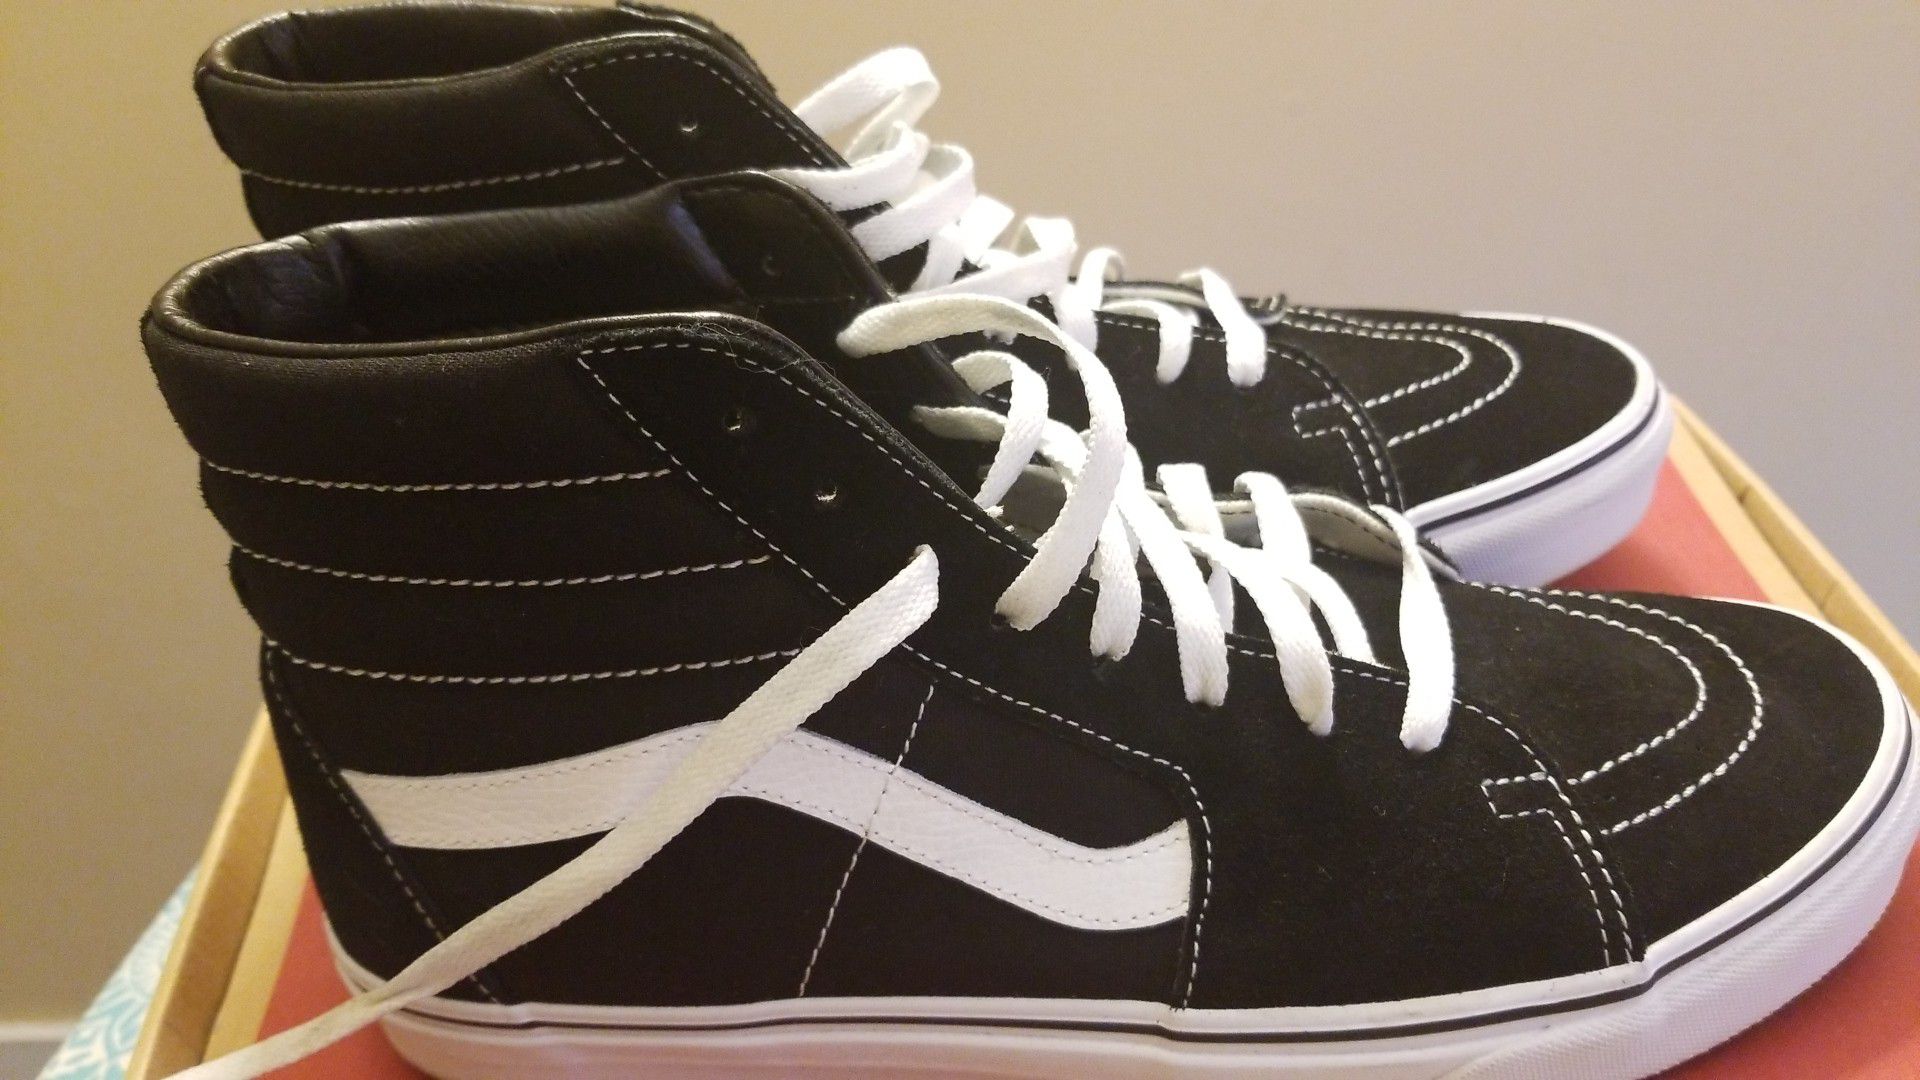 Vans black and white size 11